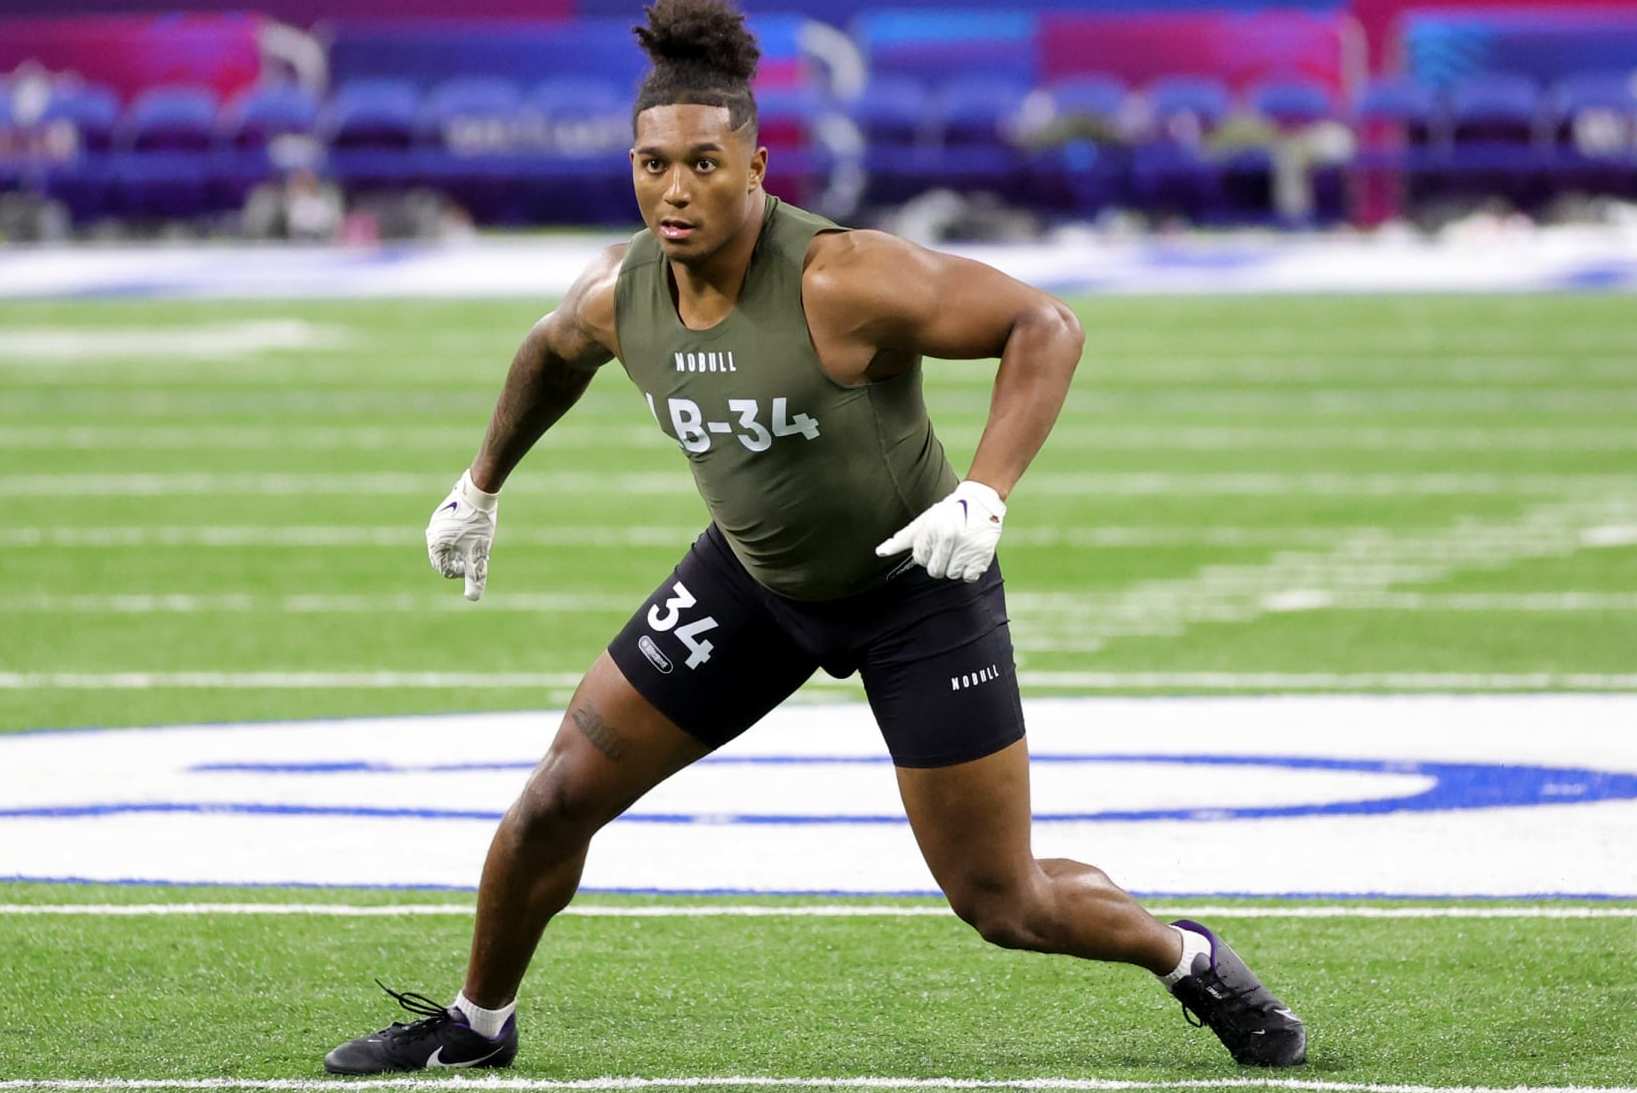 Las Vegas Raiders 2023 Draft Prospects To Target at NFL Combine Include  Anthony Richardson, Dawand Jones, and Marvin Mims